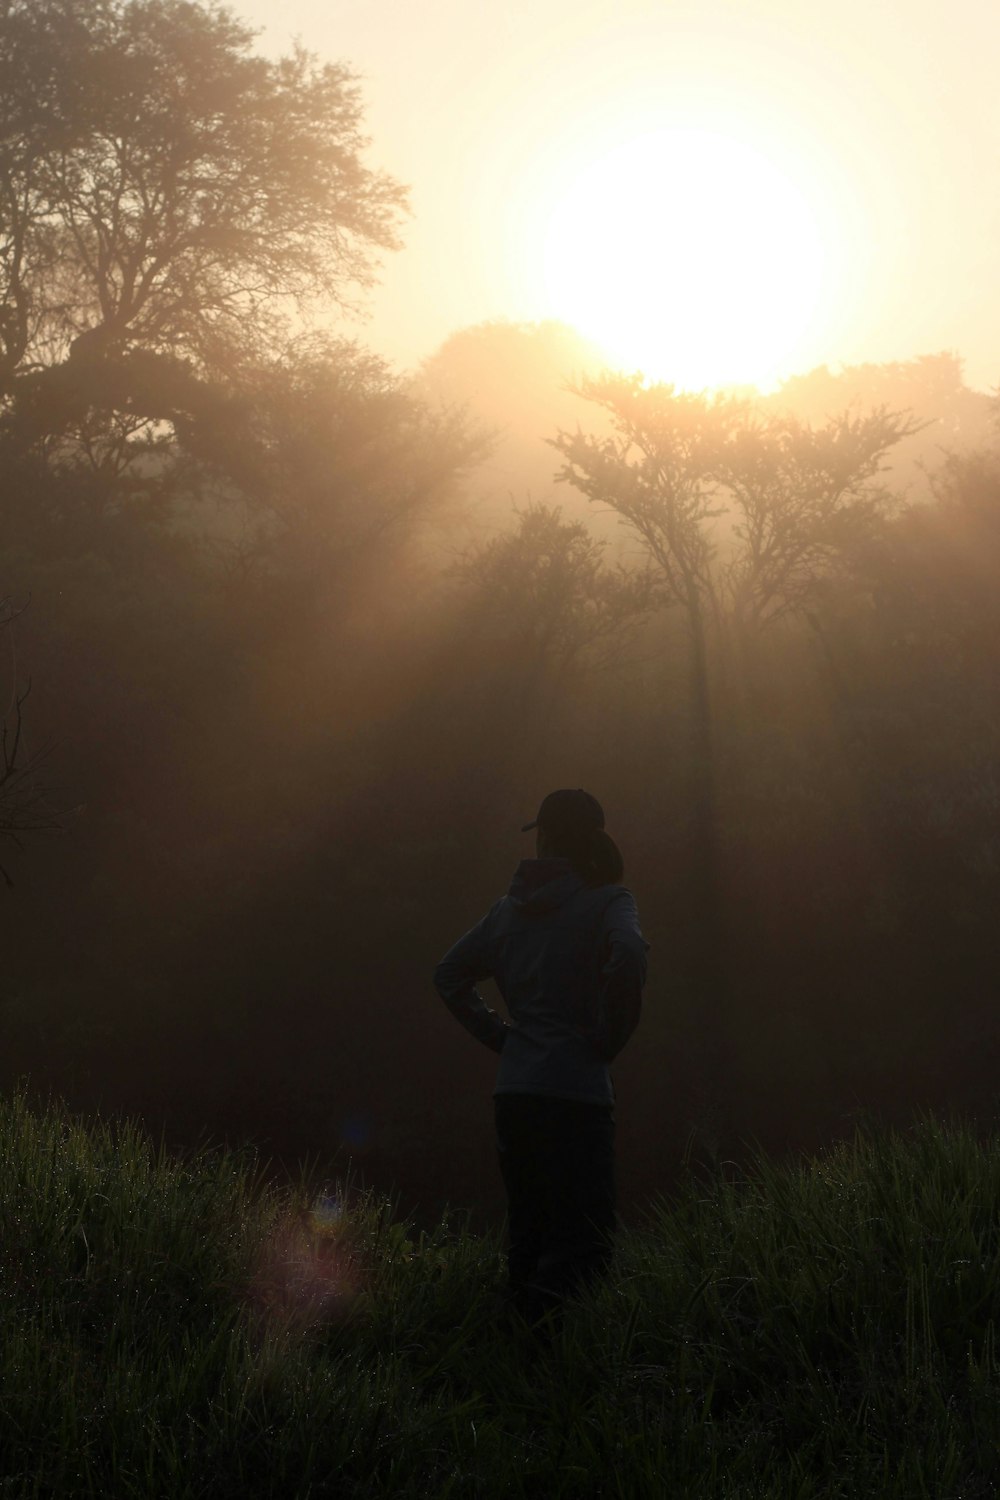 a person standing in a foggy field with trees and a bright sun